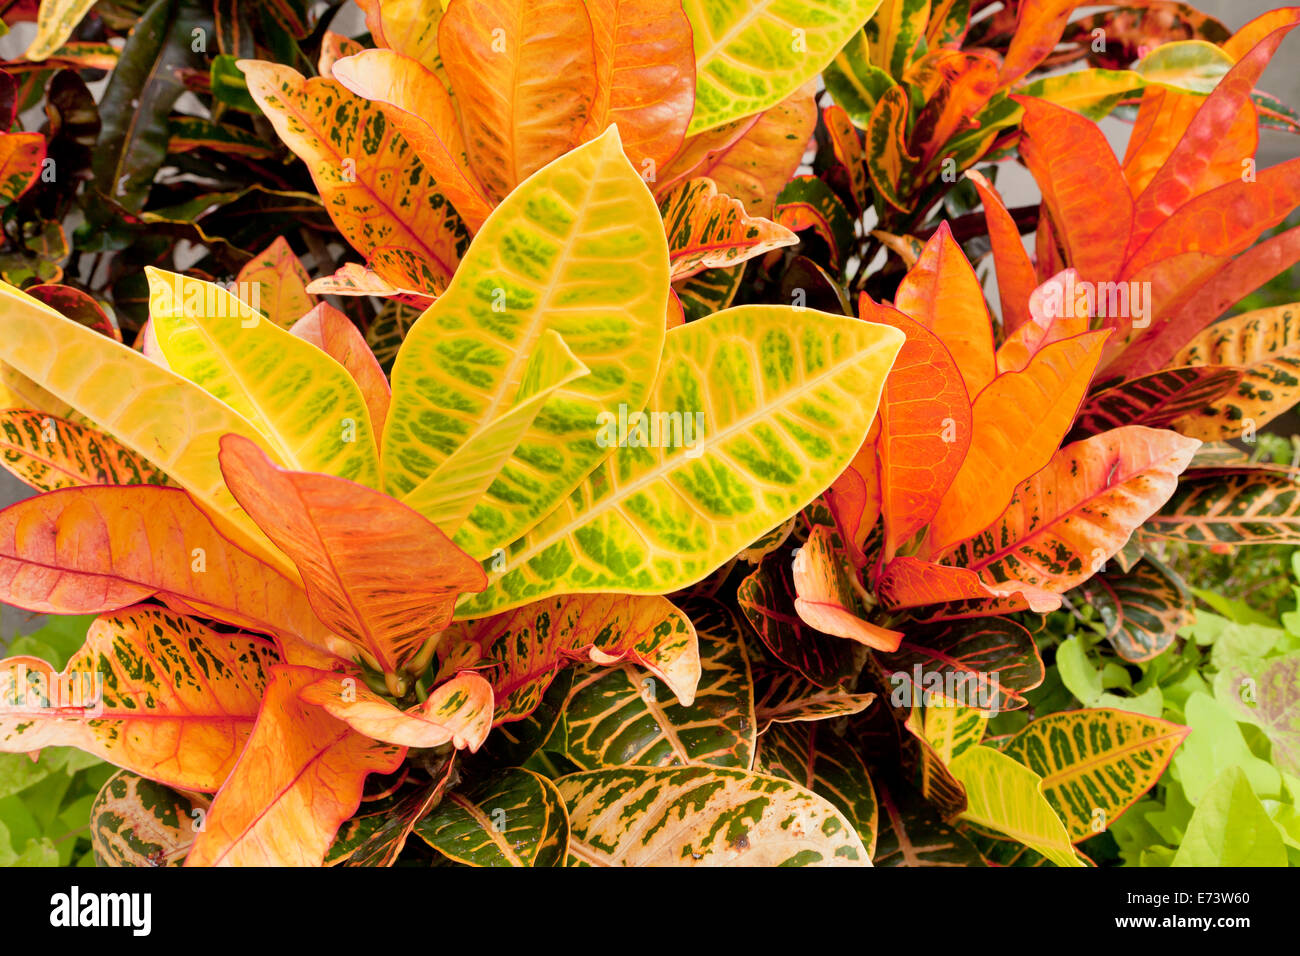 Varigated Croton plant with bright yellow leaves - USA Stock Photo